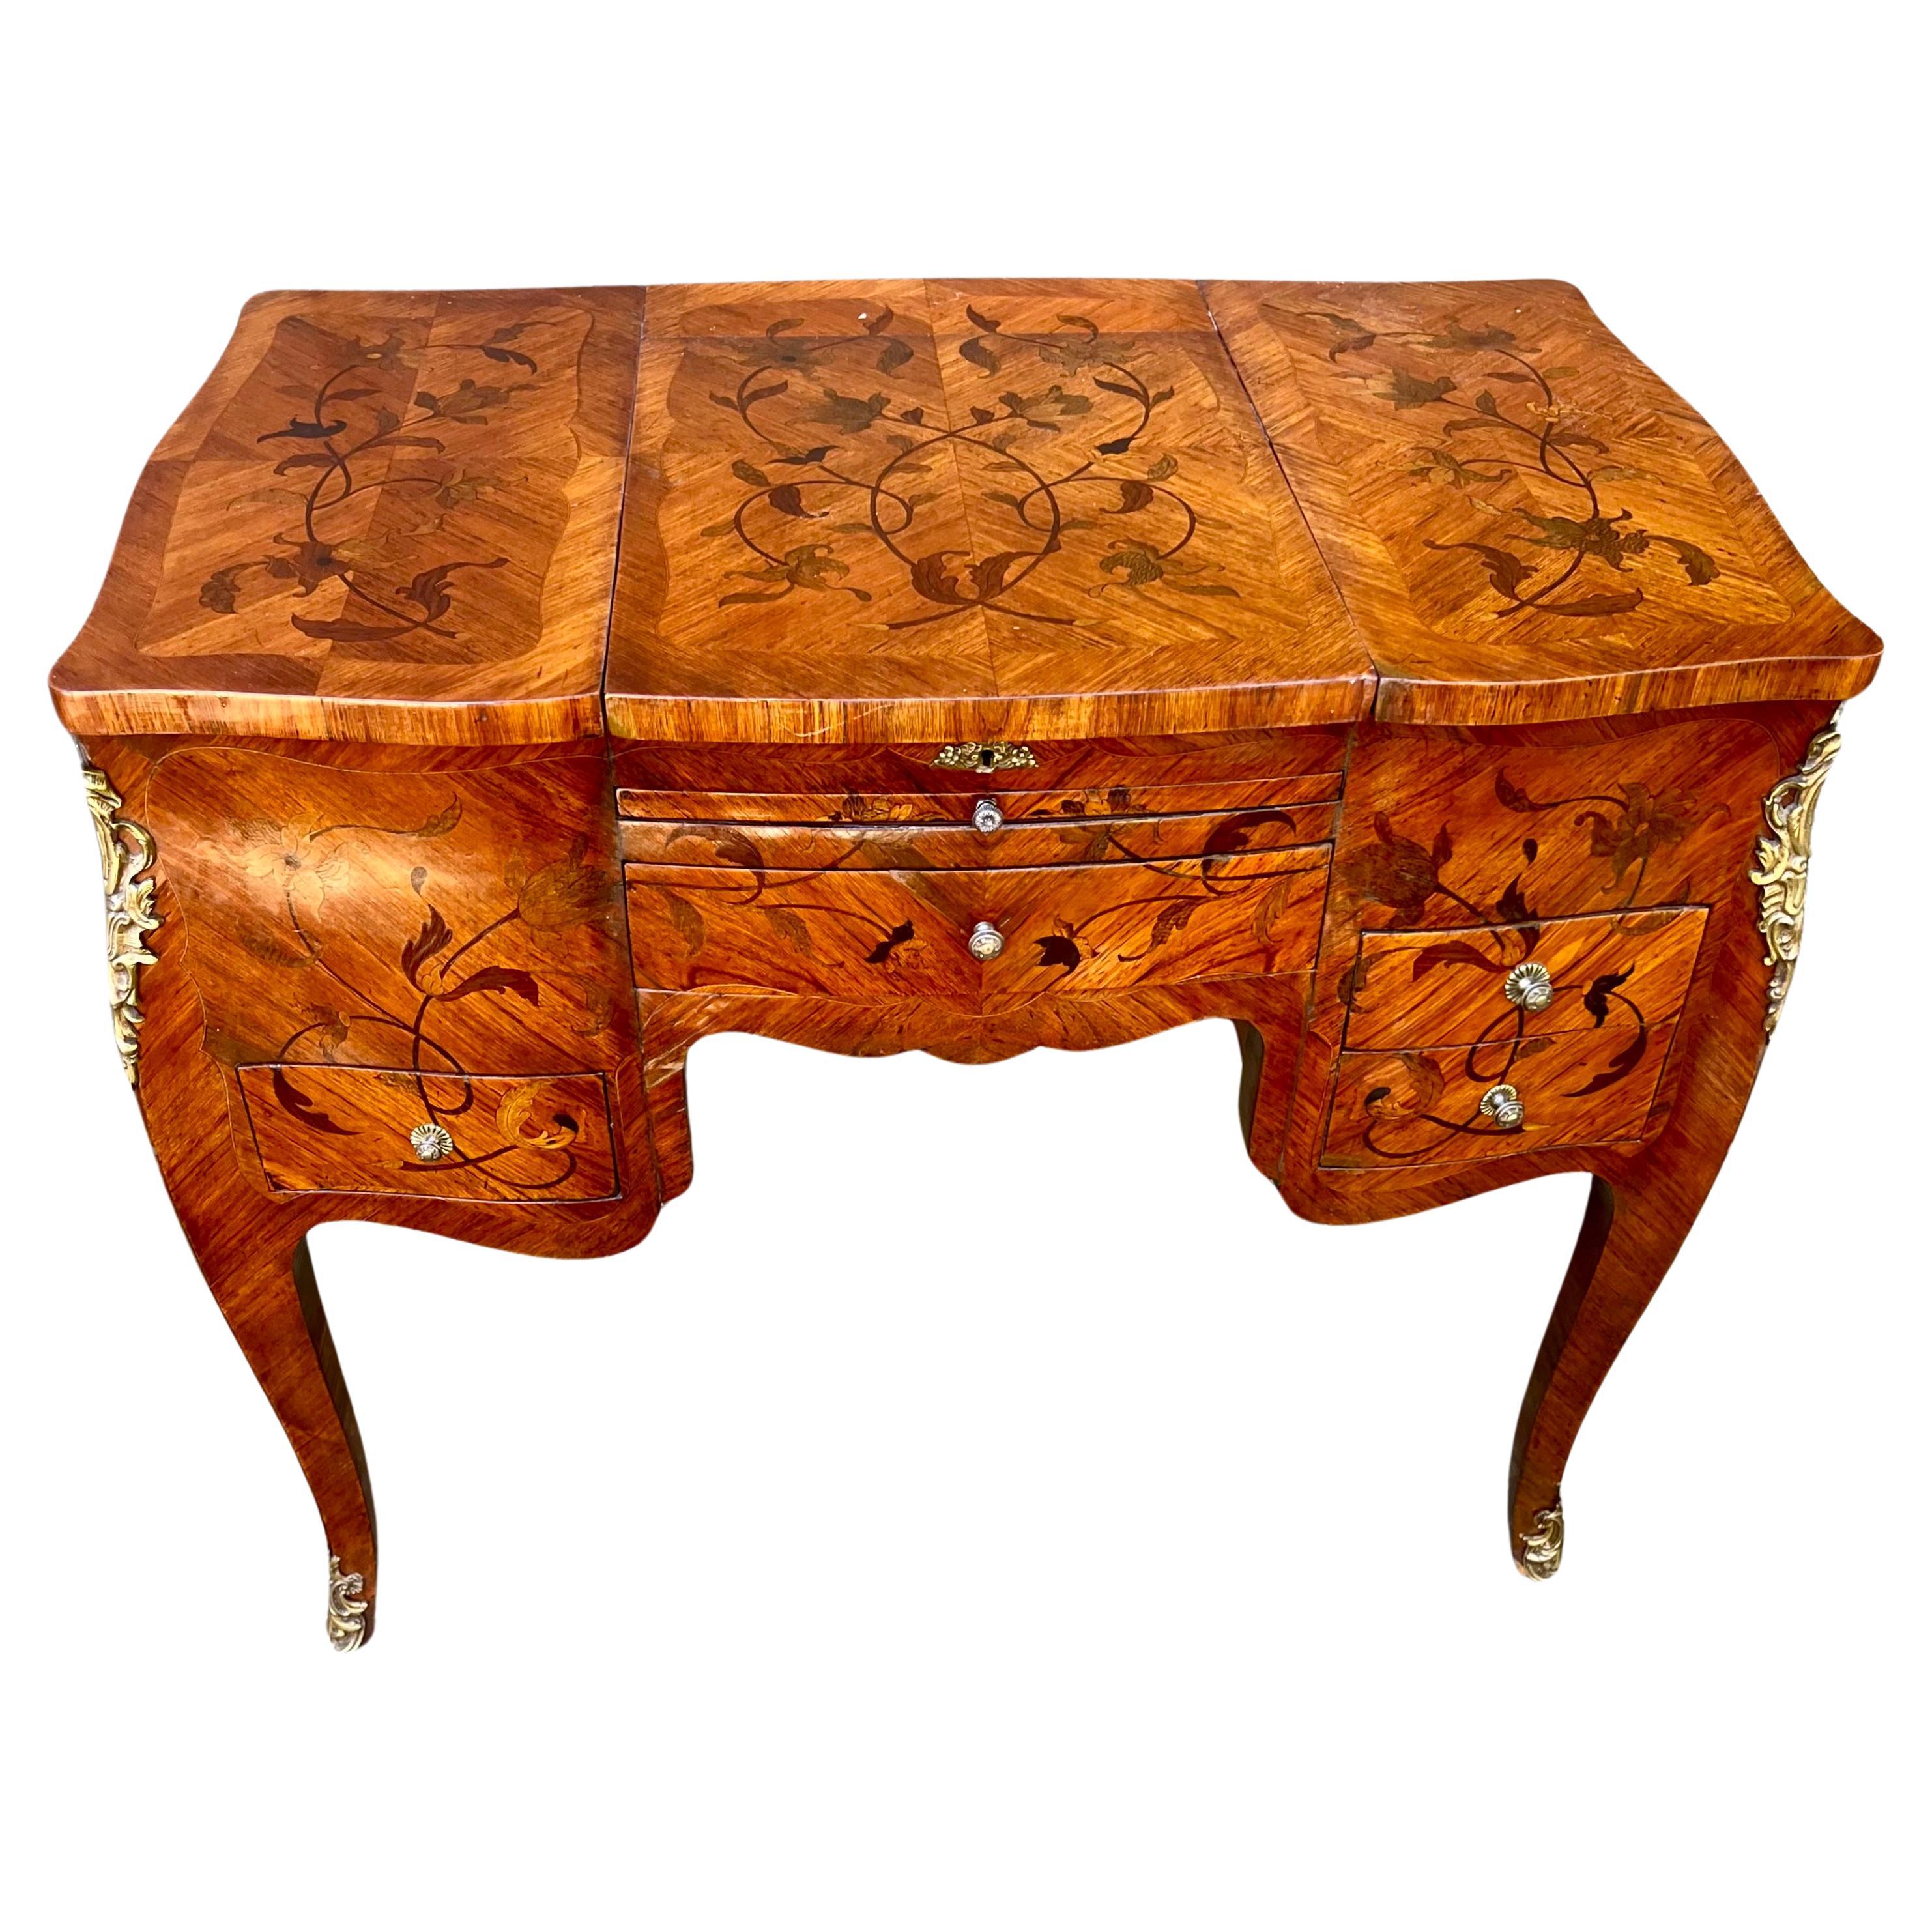 Louis Xv Transitional to LouisXvi Tulipwood Parquetry and Marquetry Floral Case  For Sale